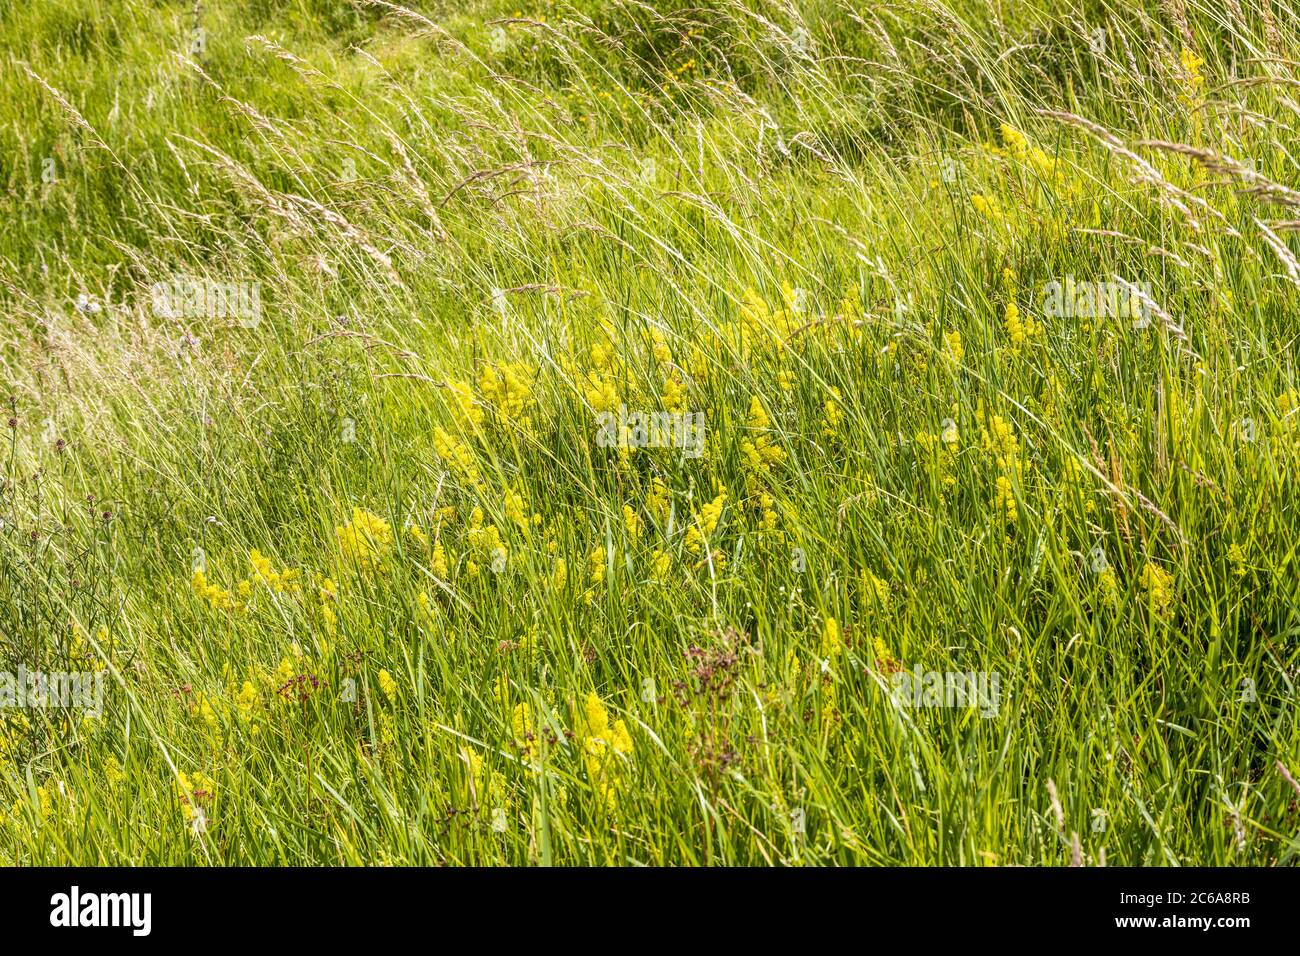 Lady's bedstraw (Galium verum) flowering in long grass on a hillside overlooking the valley of the River Windrush near the Cotswold village of Naunton Stock Photo